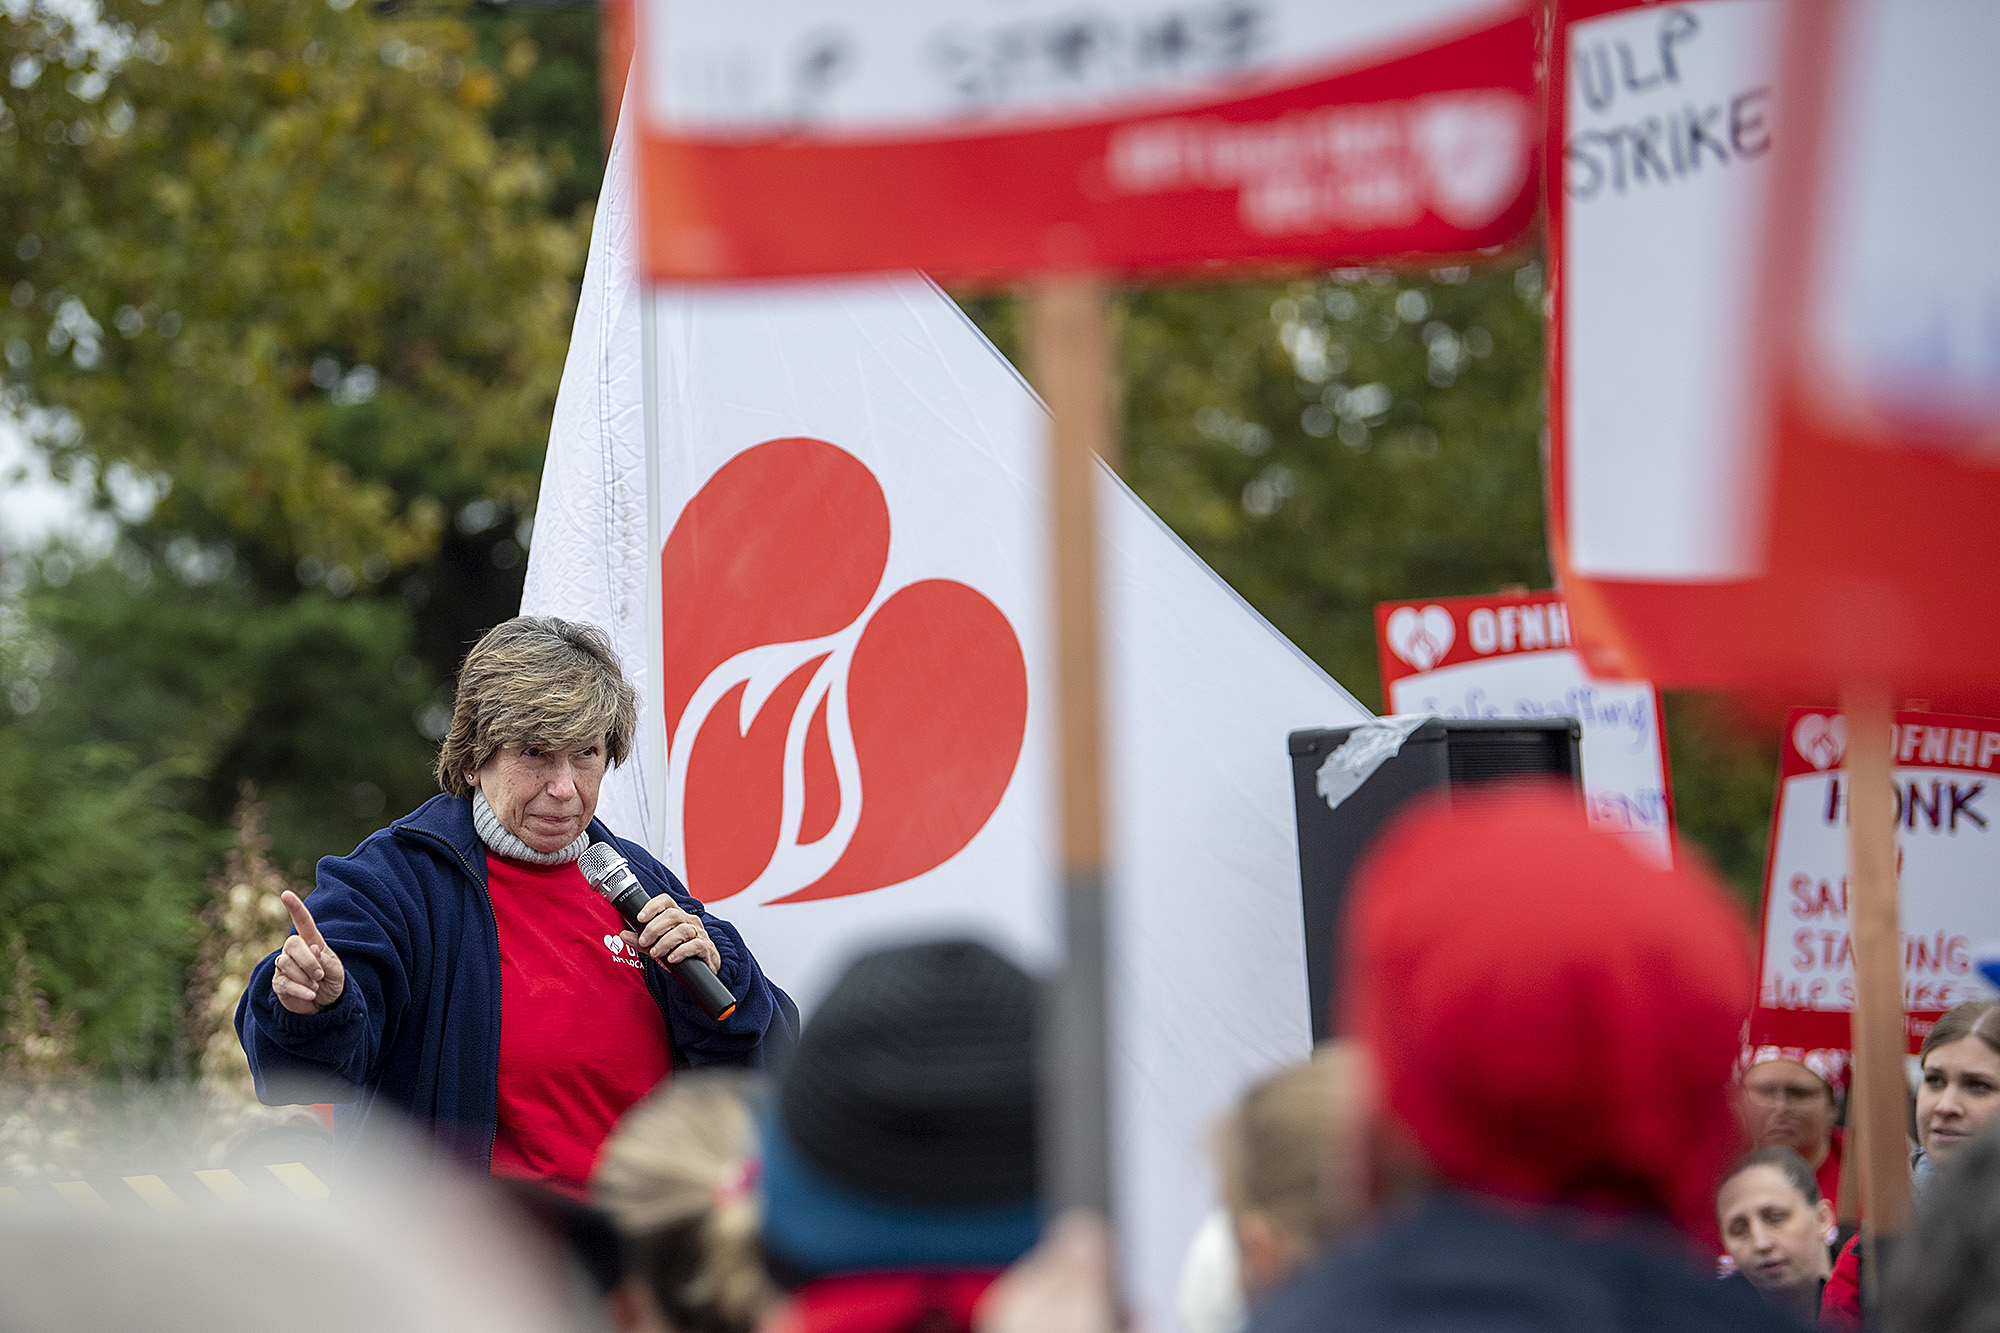 Randi Weingarten, president of the 1.7 million-member American Federation of Teachers, rallies 1,300-plus striking PeaceHealth Southwest Medical Center workers across from the hospital Thursday afternoon, Oct. 26, 2023.